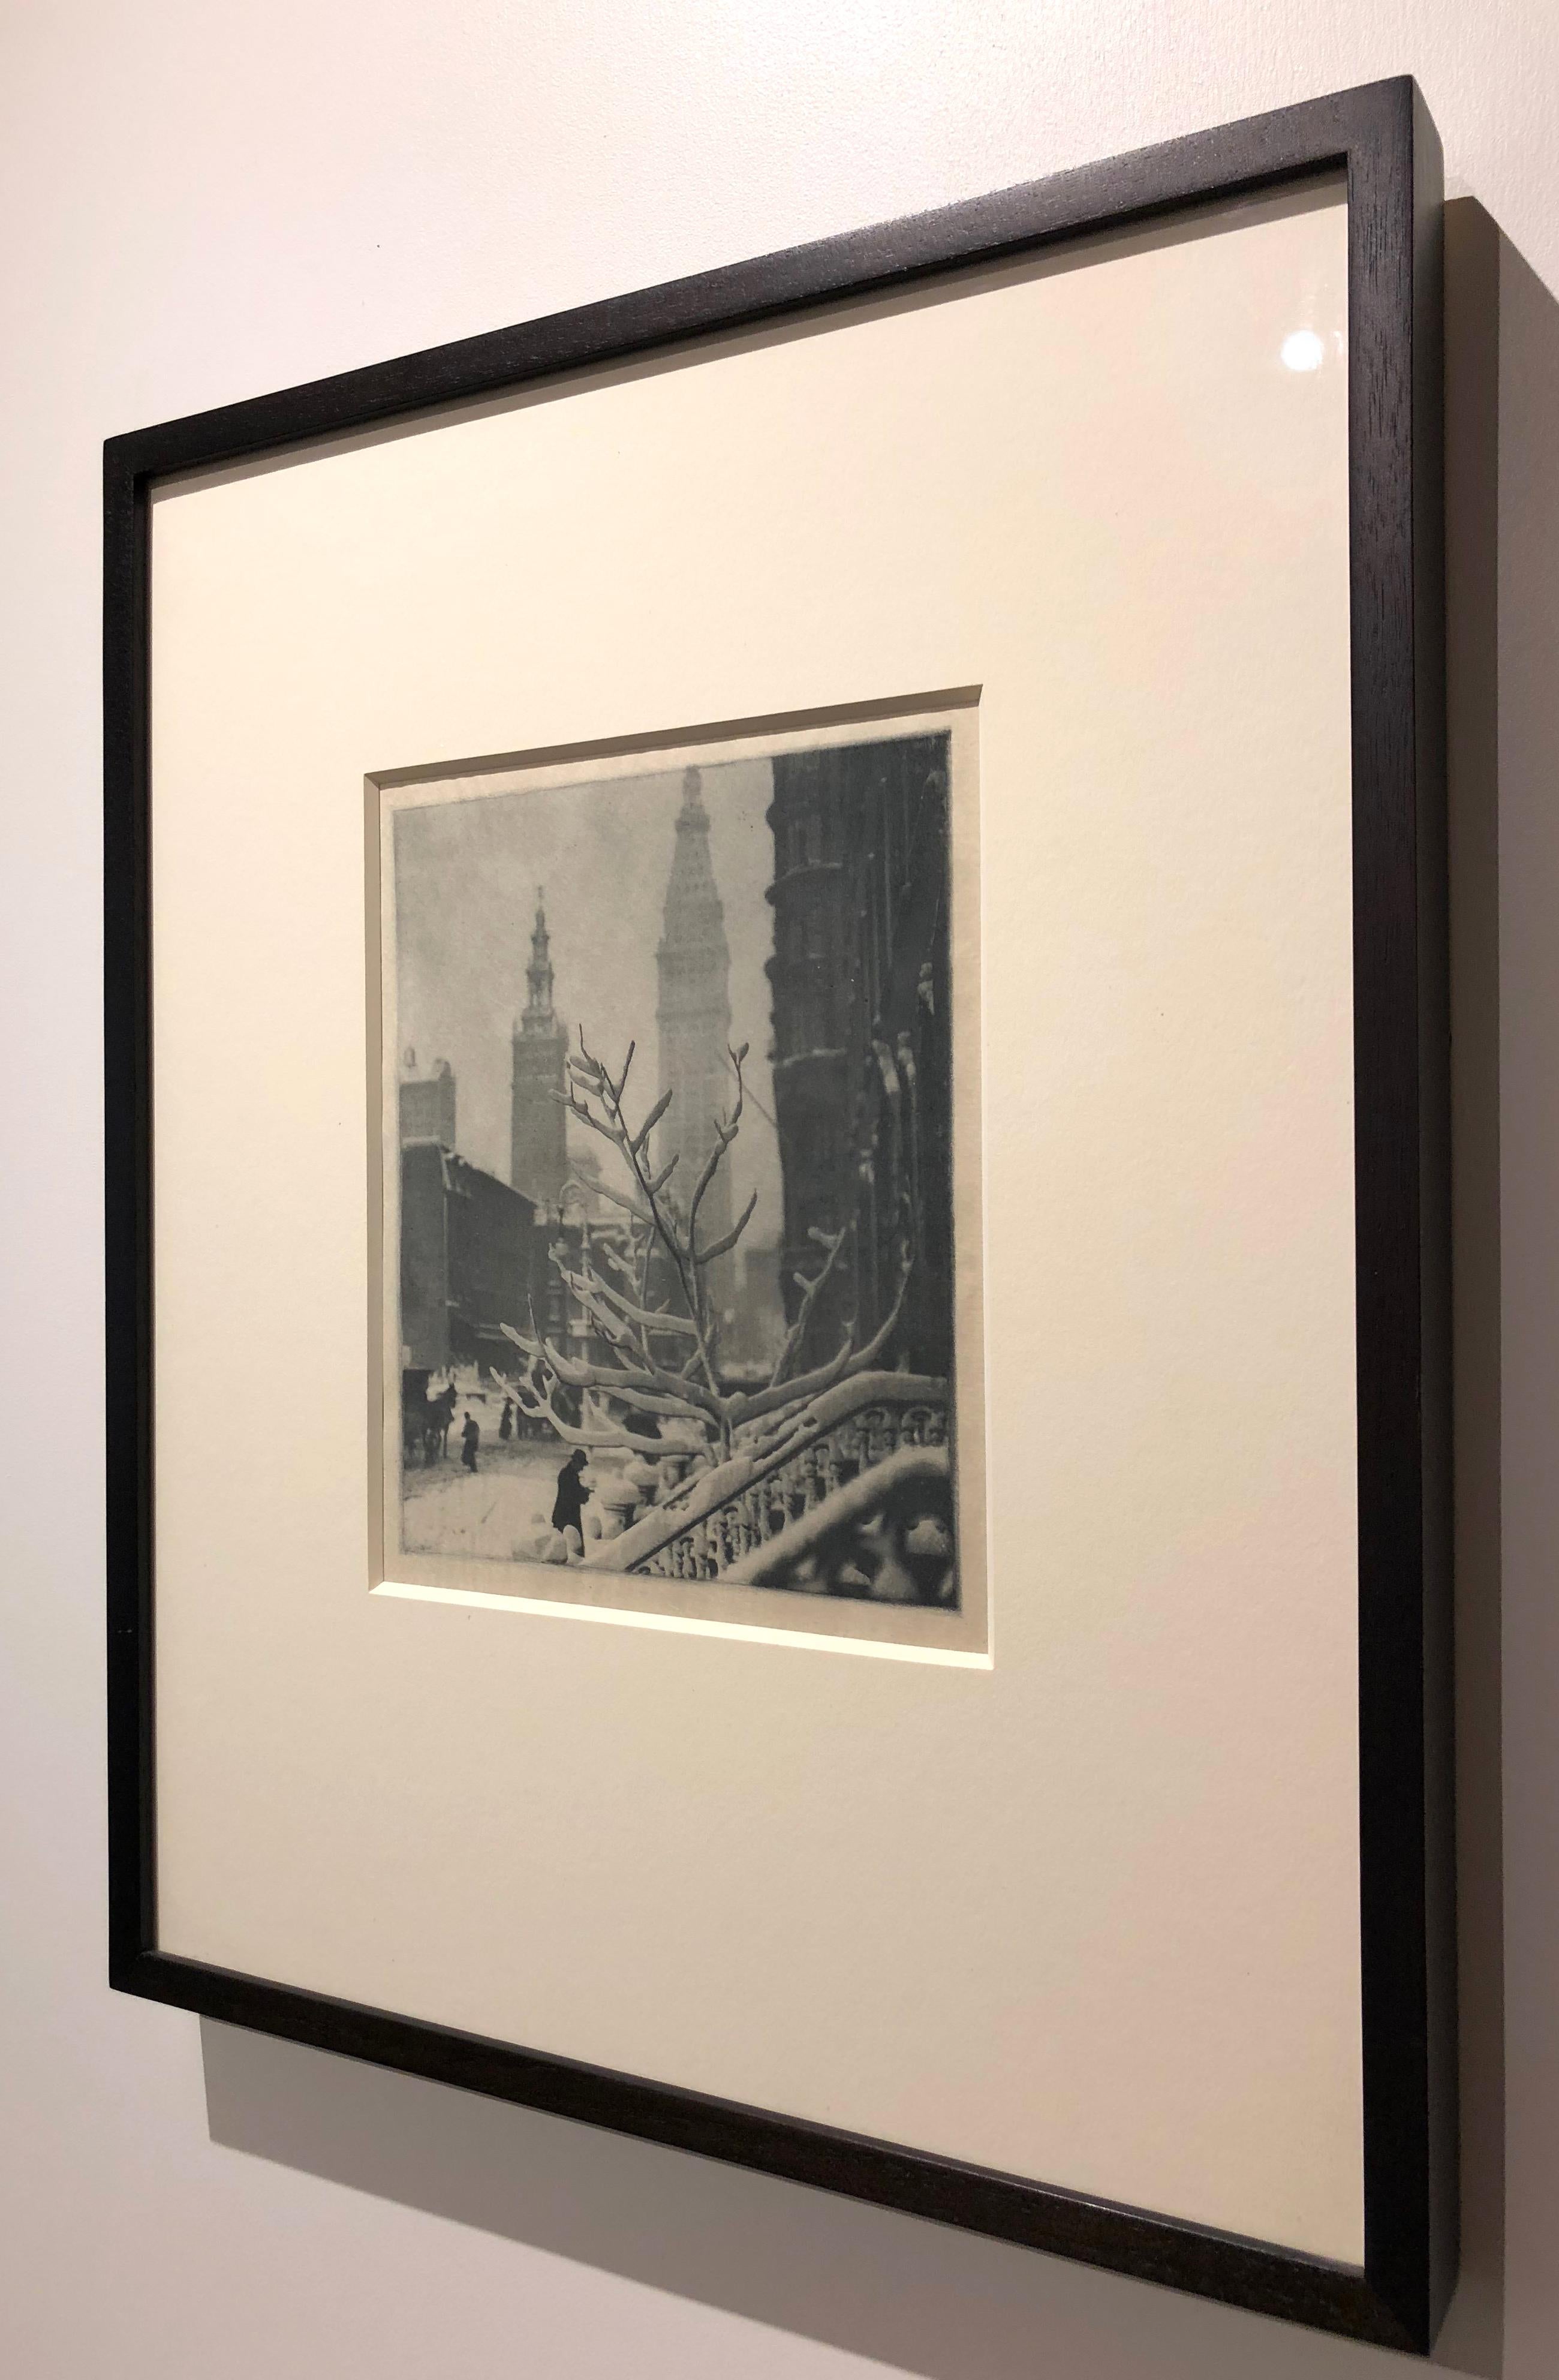 
Alfred Stieglitz (1864–1946). Camera Work Volume 44. Date: 1911, printed in or before 1913. Photogravure on Japanese tissue mounted to paper. 7.75 x 6.25,” paper size 11.25 x 7.75,” framed 16.5 x 13.25″

Alfred Stieglitz’s significance as an art